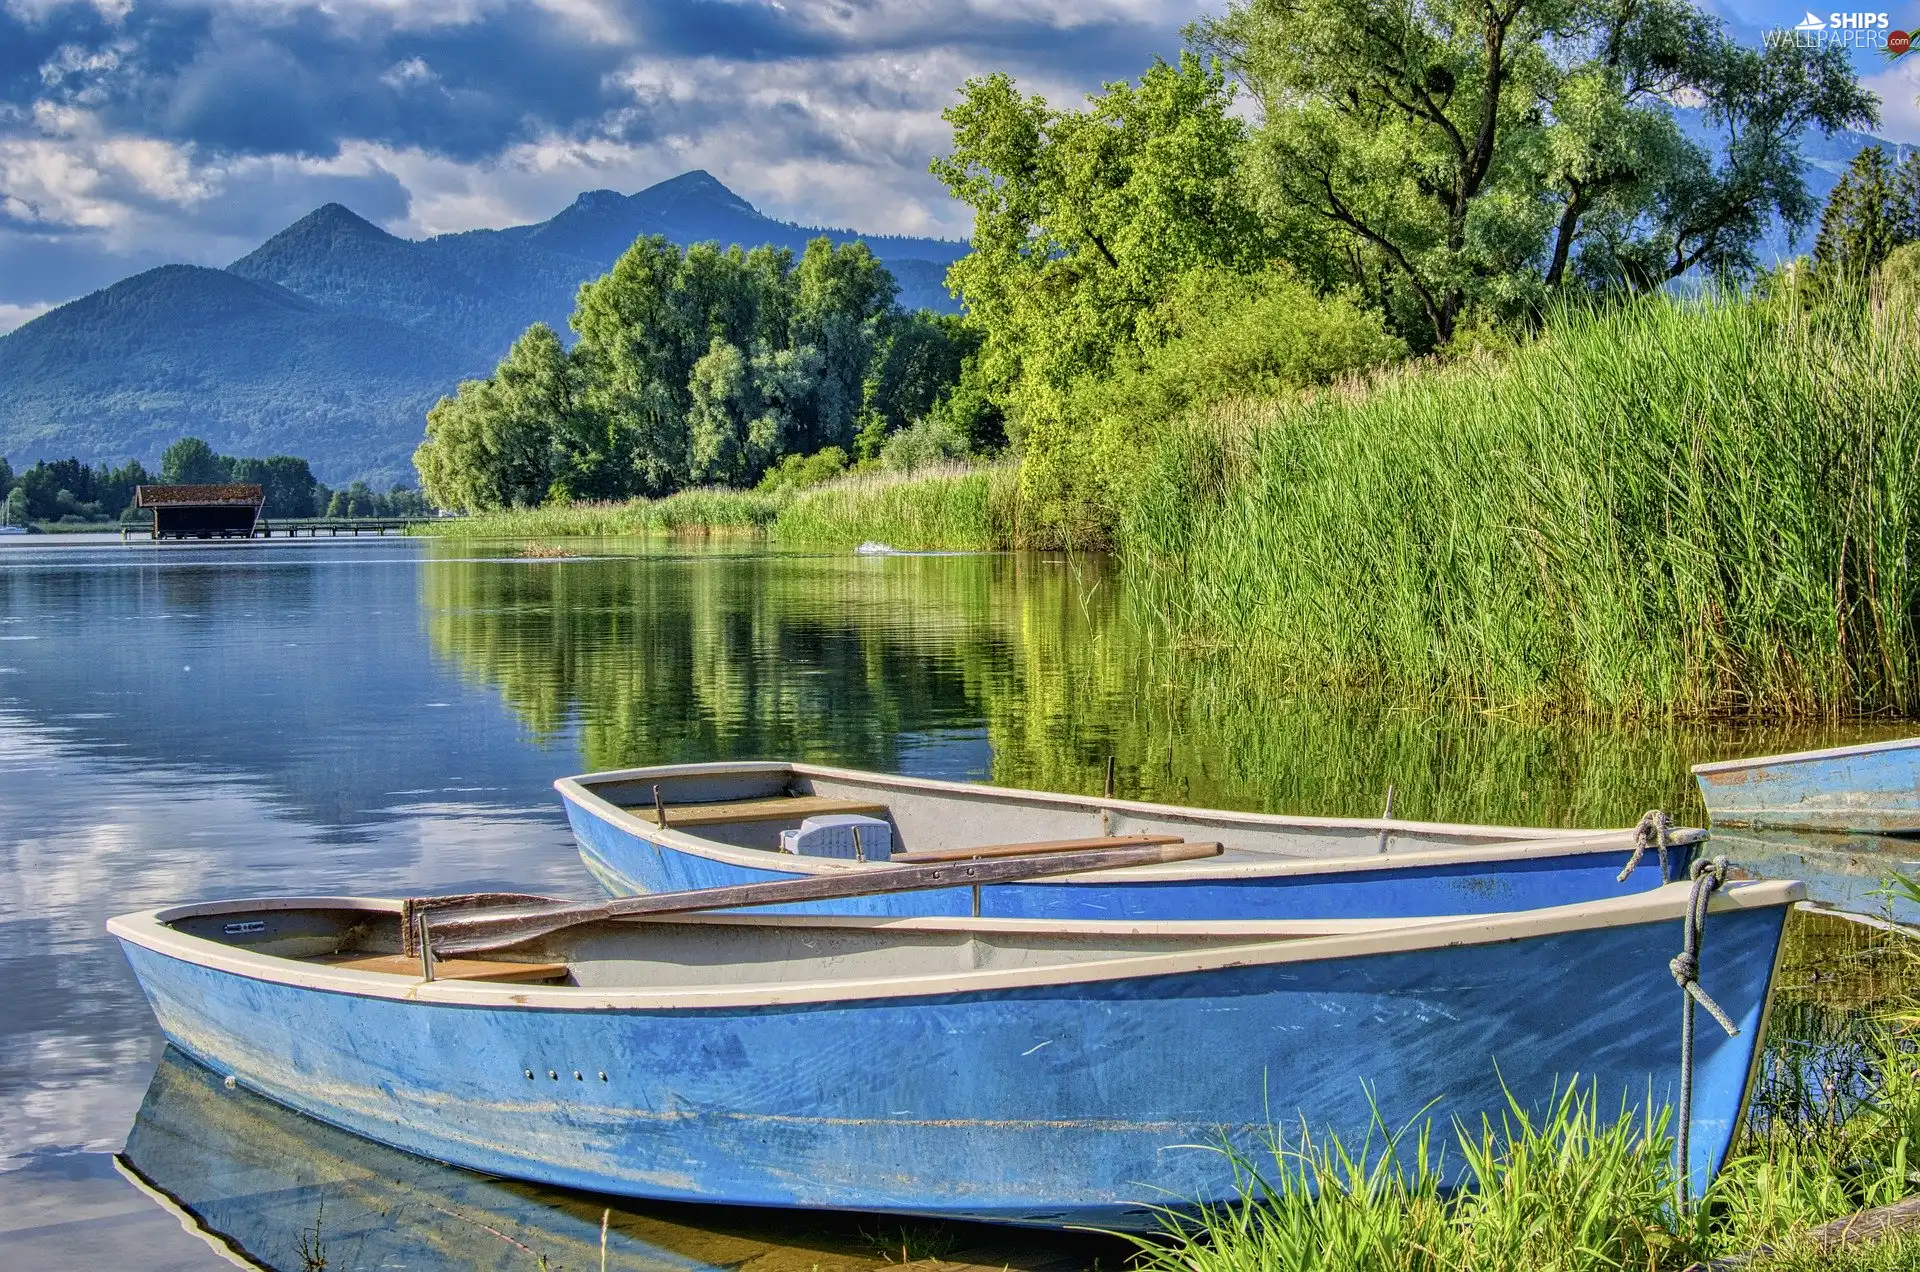 trees, lake, rushes, Mountains, viewes, boats